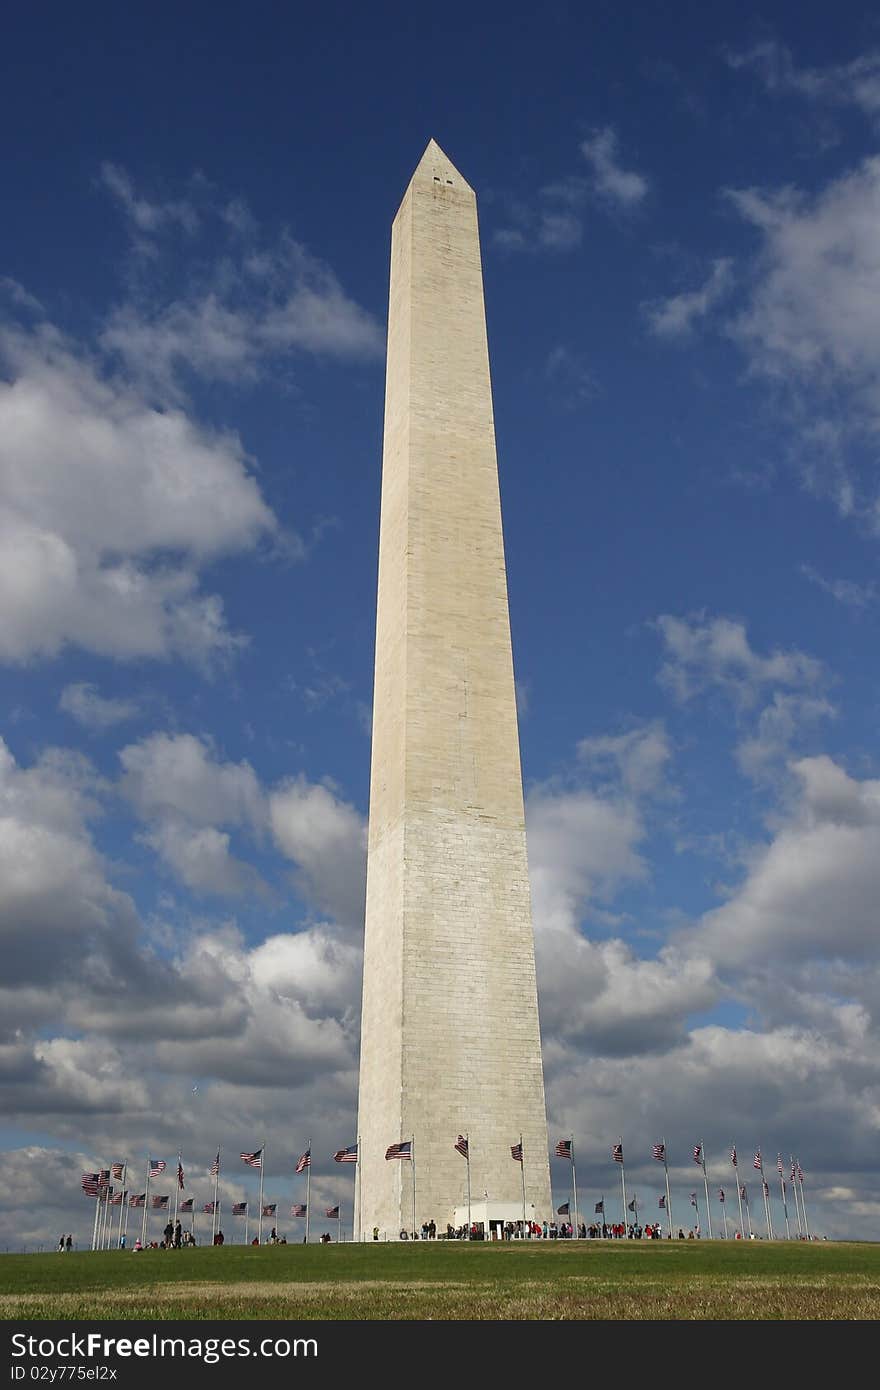 The Washington Monument is an obelisk near the west end of the National Mall in Washington, D.C., built to commemorate the first U.S. president, General George Washington.